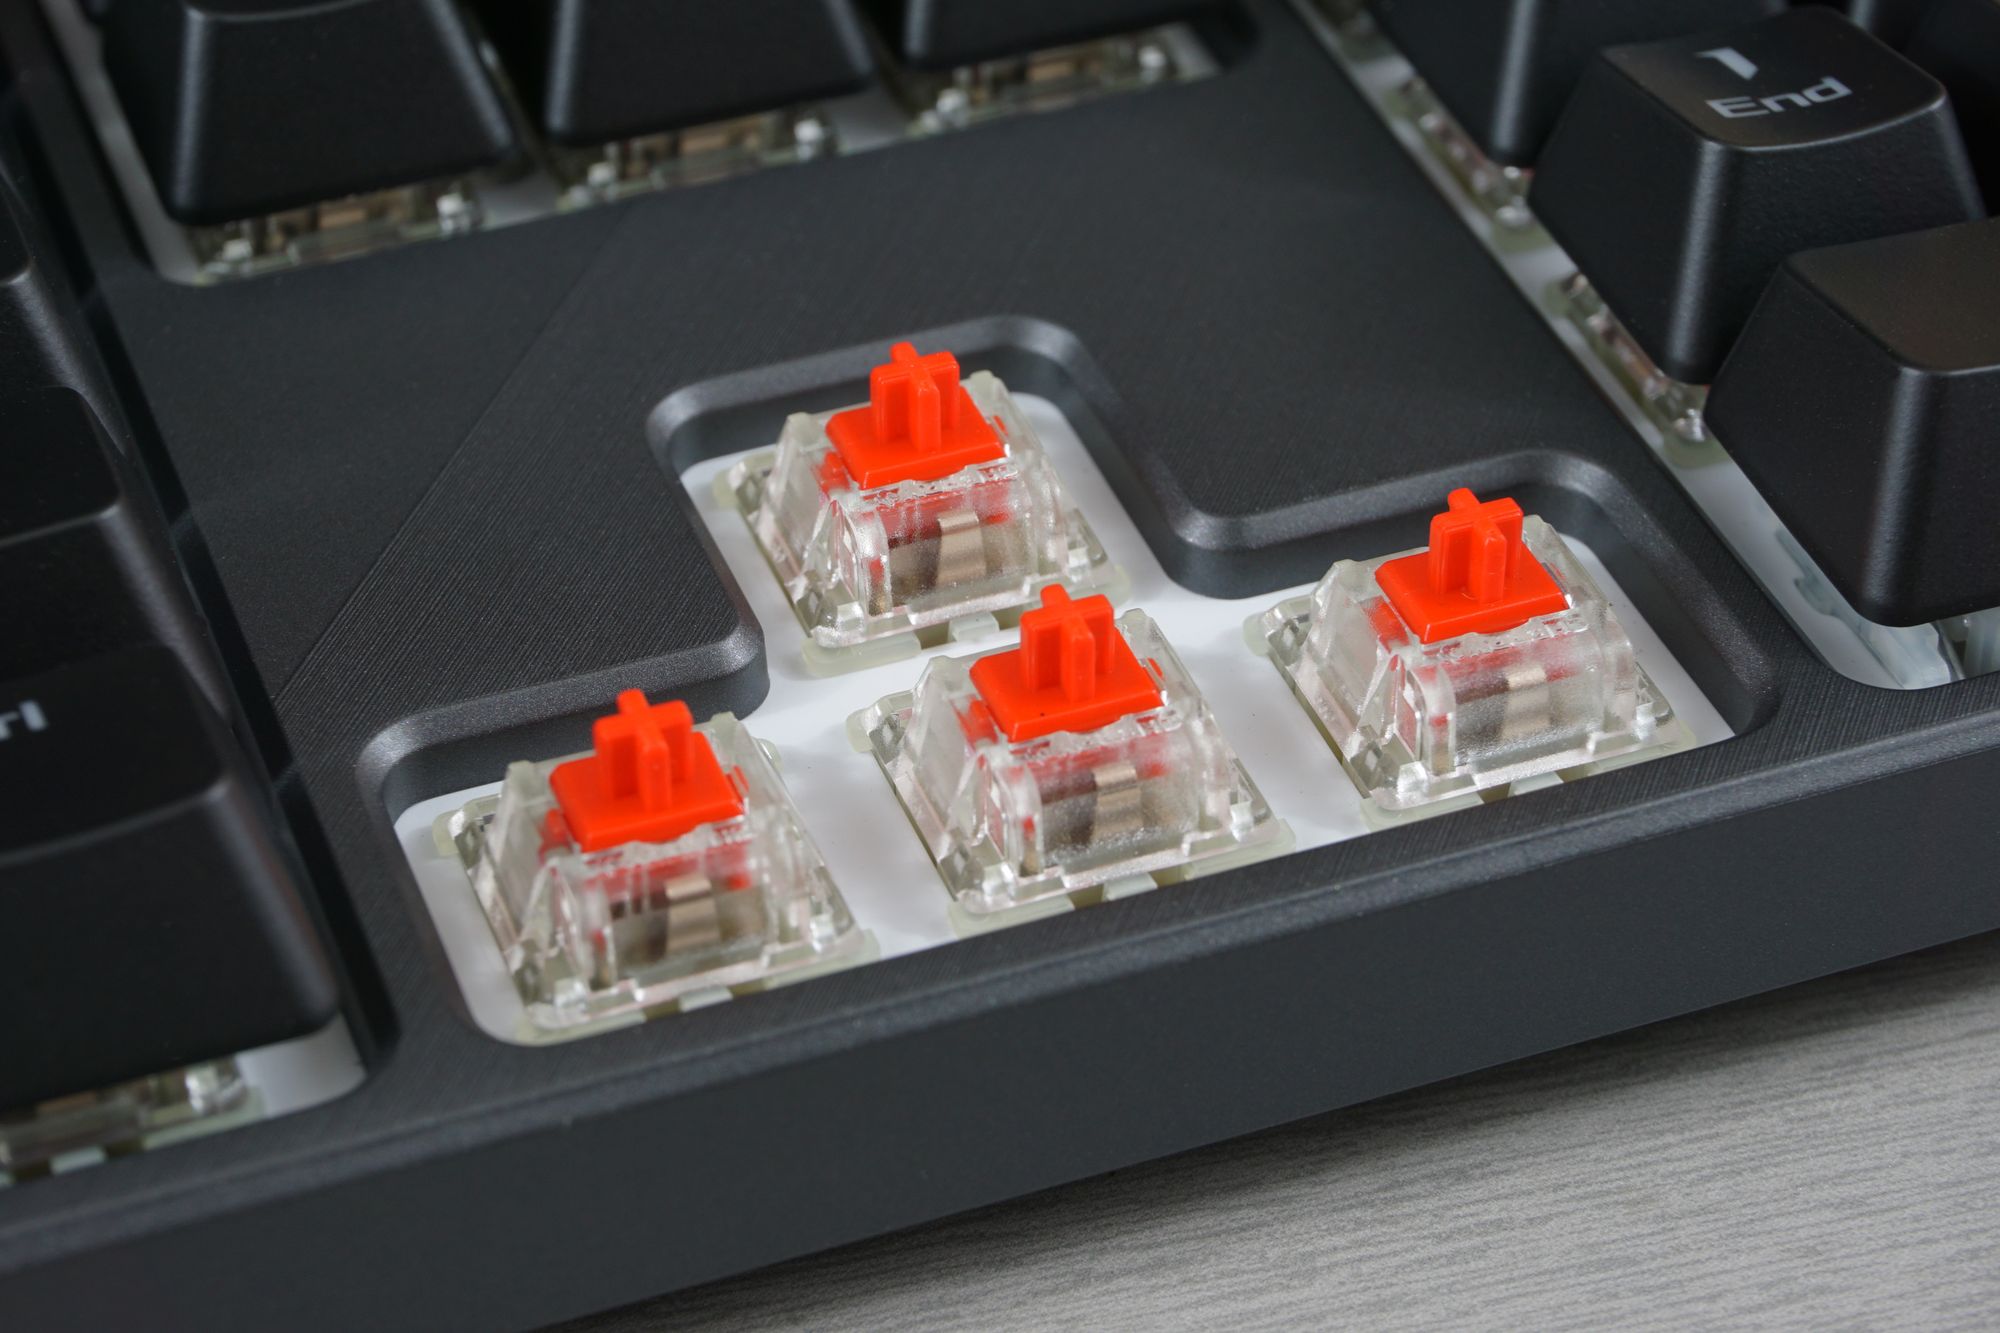 Choose your favorite Cherry MX switch for the Strix Flare